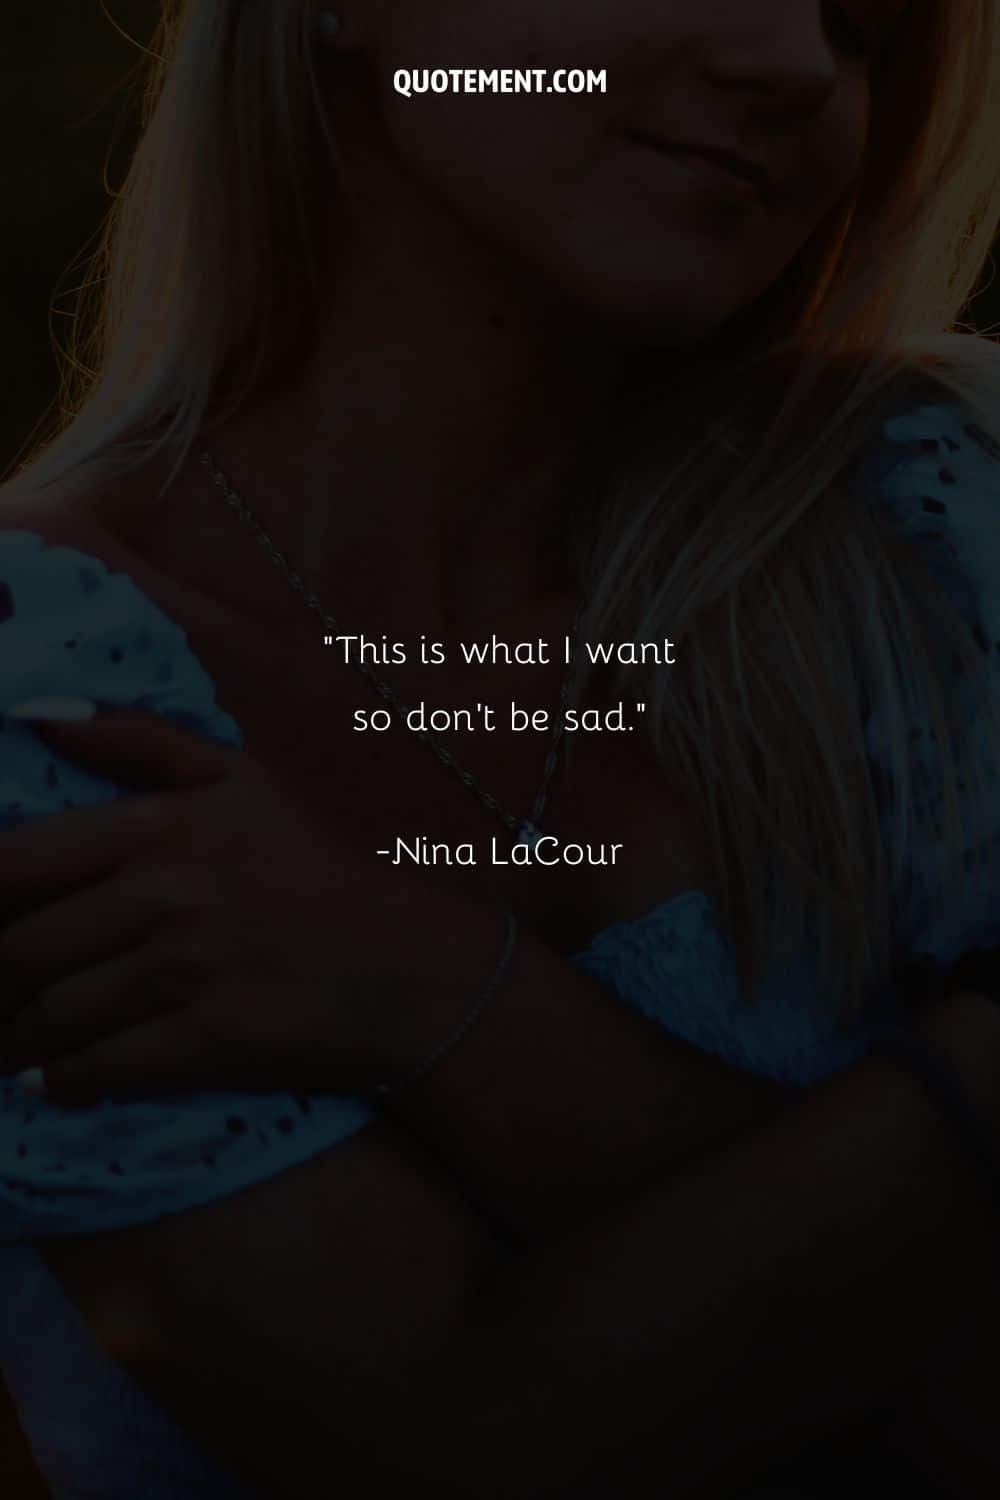 A woman with flowing blonde hair representing quote on regrets